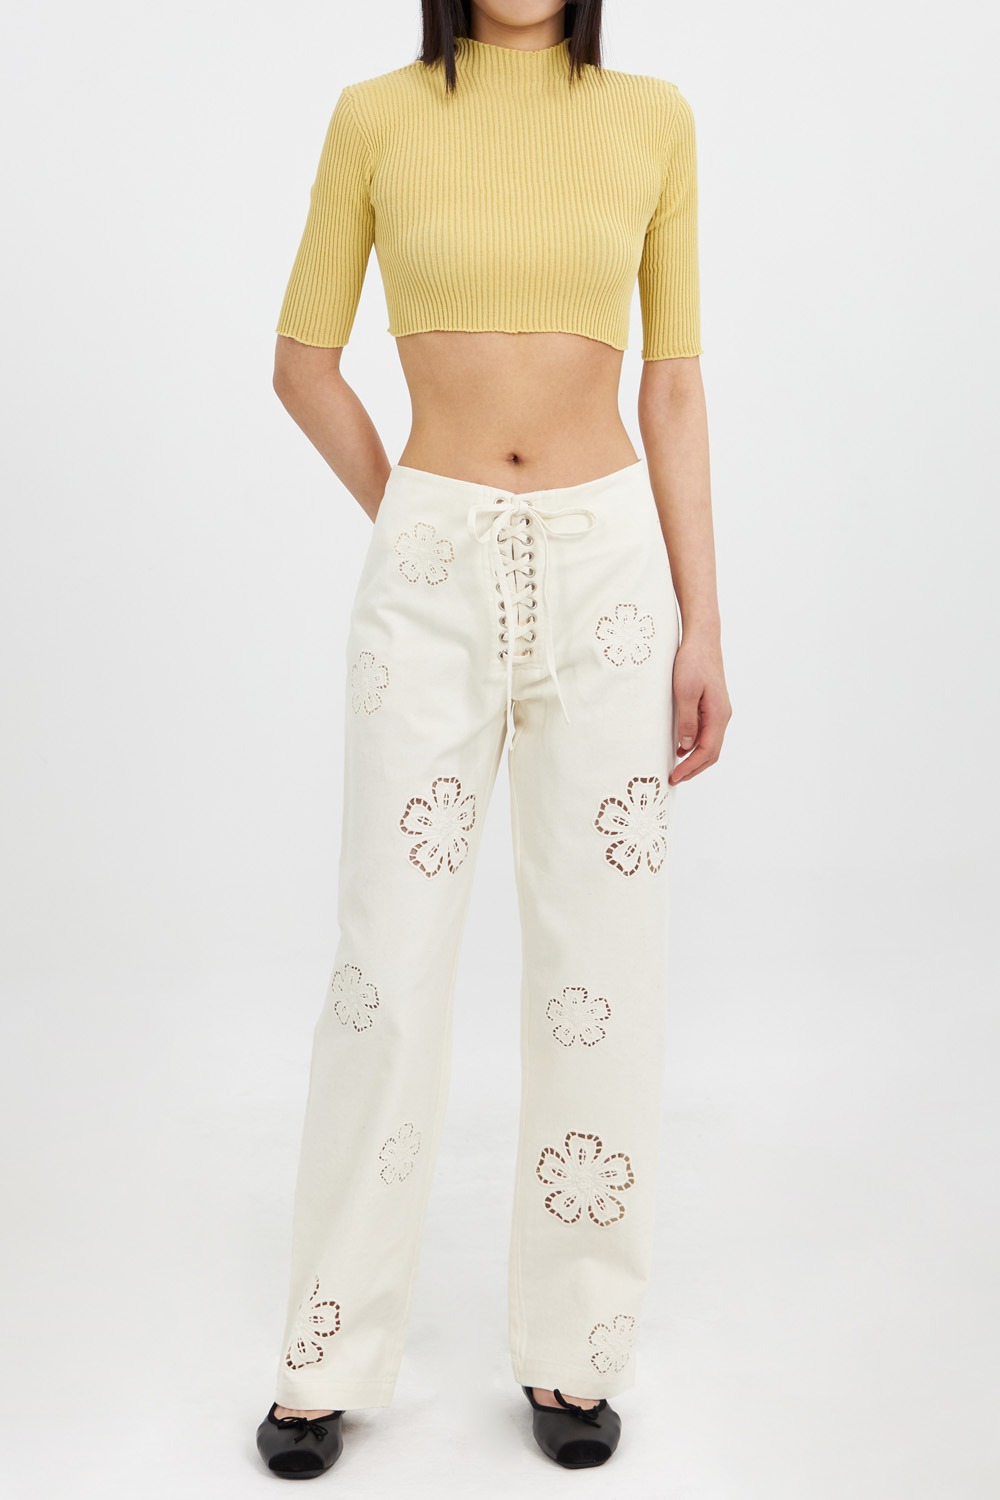 Taras Cutwork Embroidered Pant_Ivory